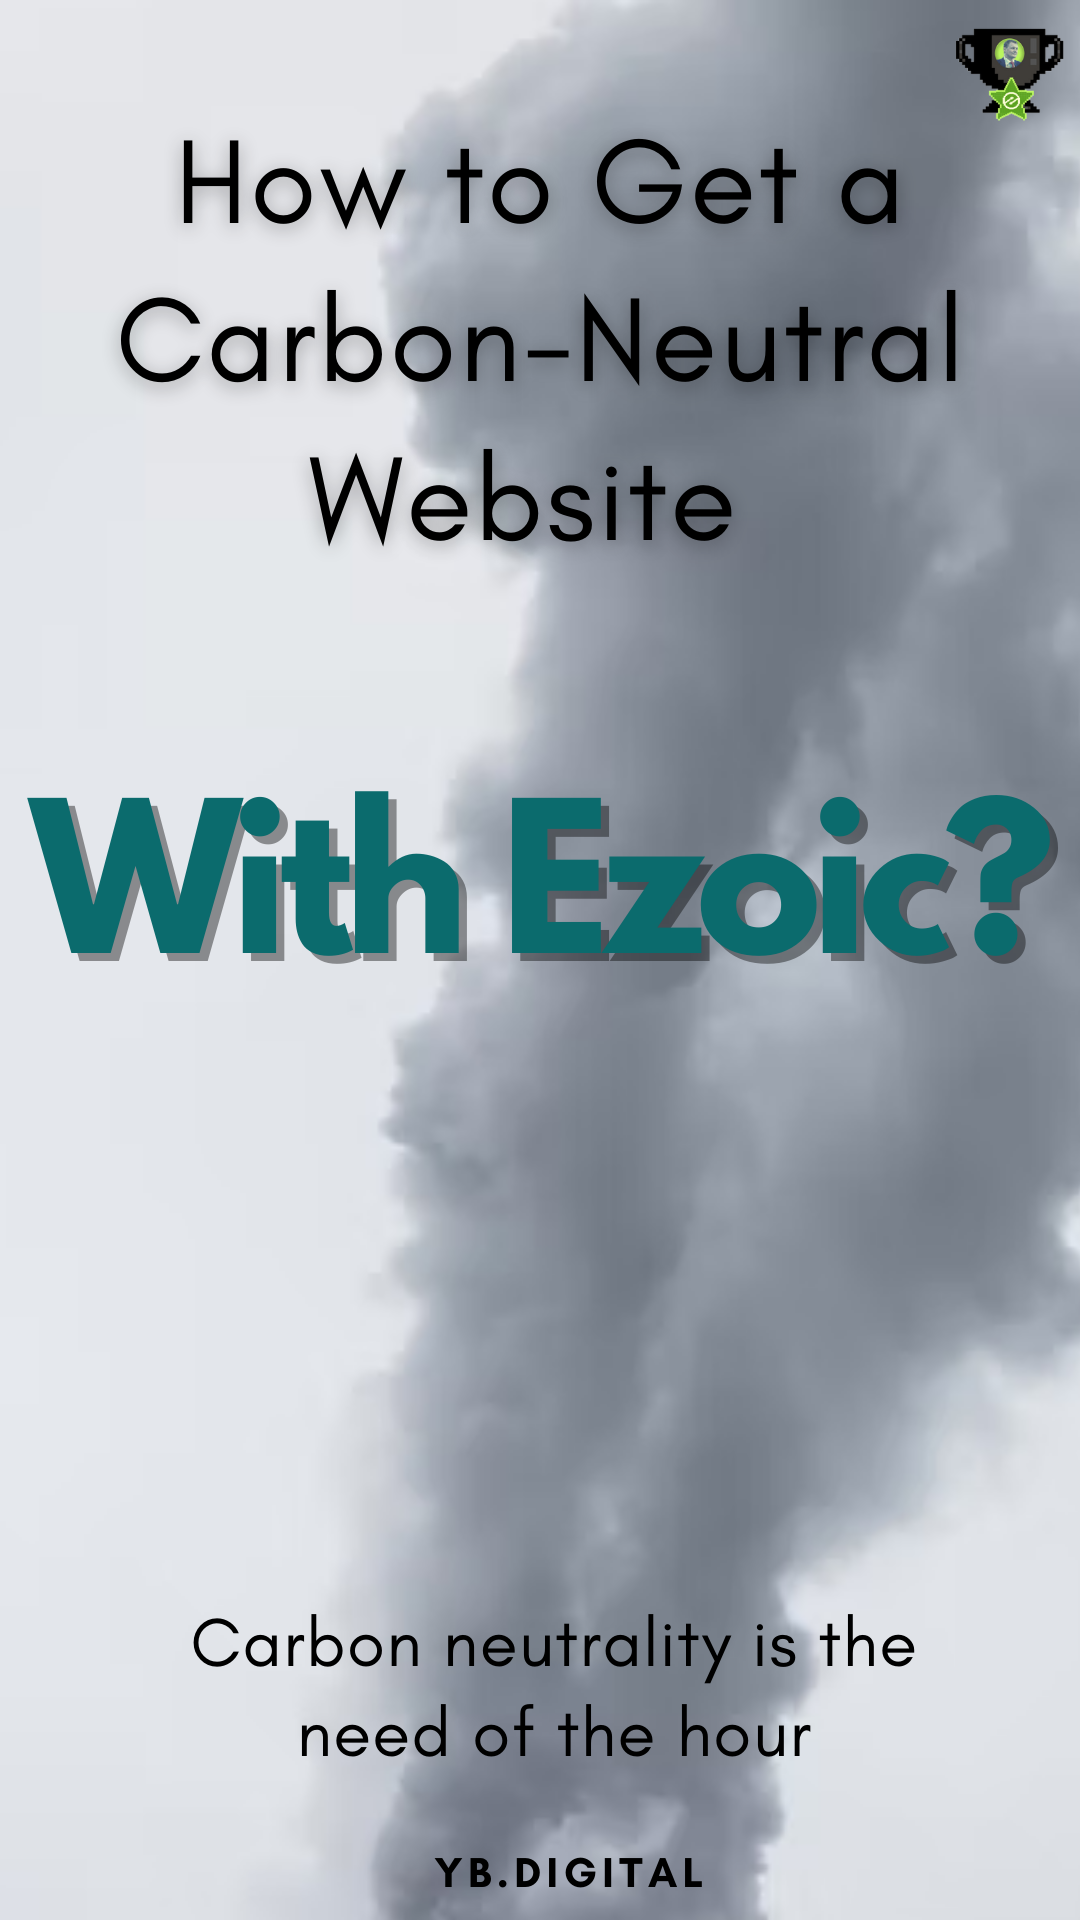 If you’re serious about reducing your carbon footprint and wish to contribute to carbon-neutral projects, consider Ezoic’s cloud and display ads, including charity ads. The service comes as a great option for those who are out of time and money to contribute to a greener planet.